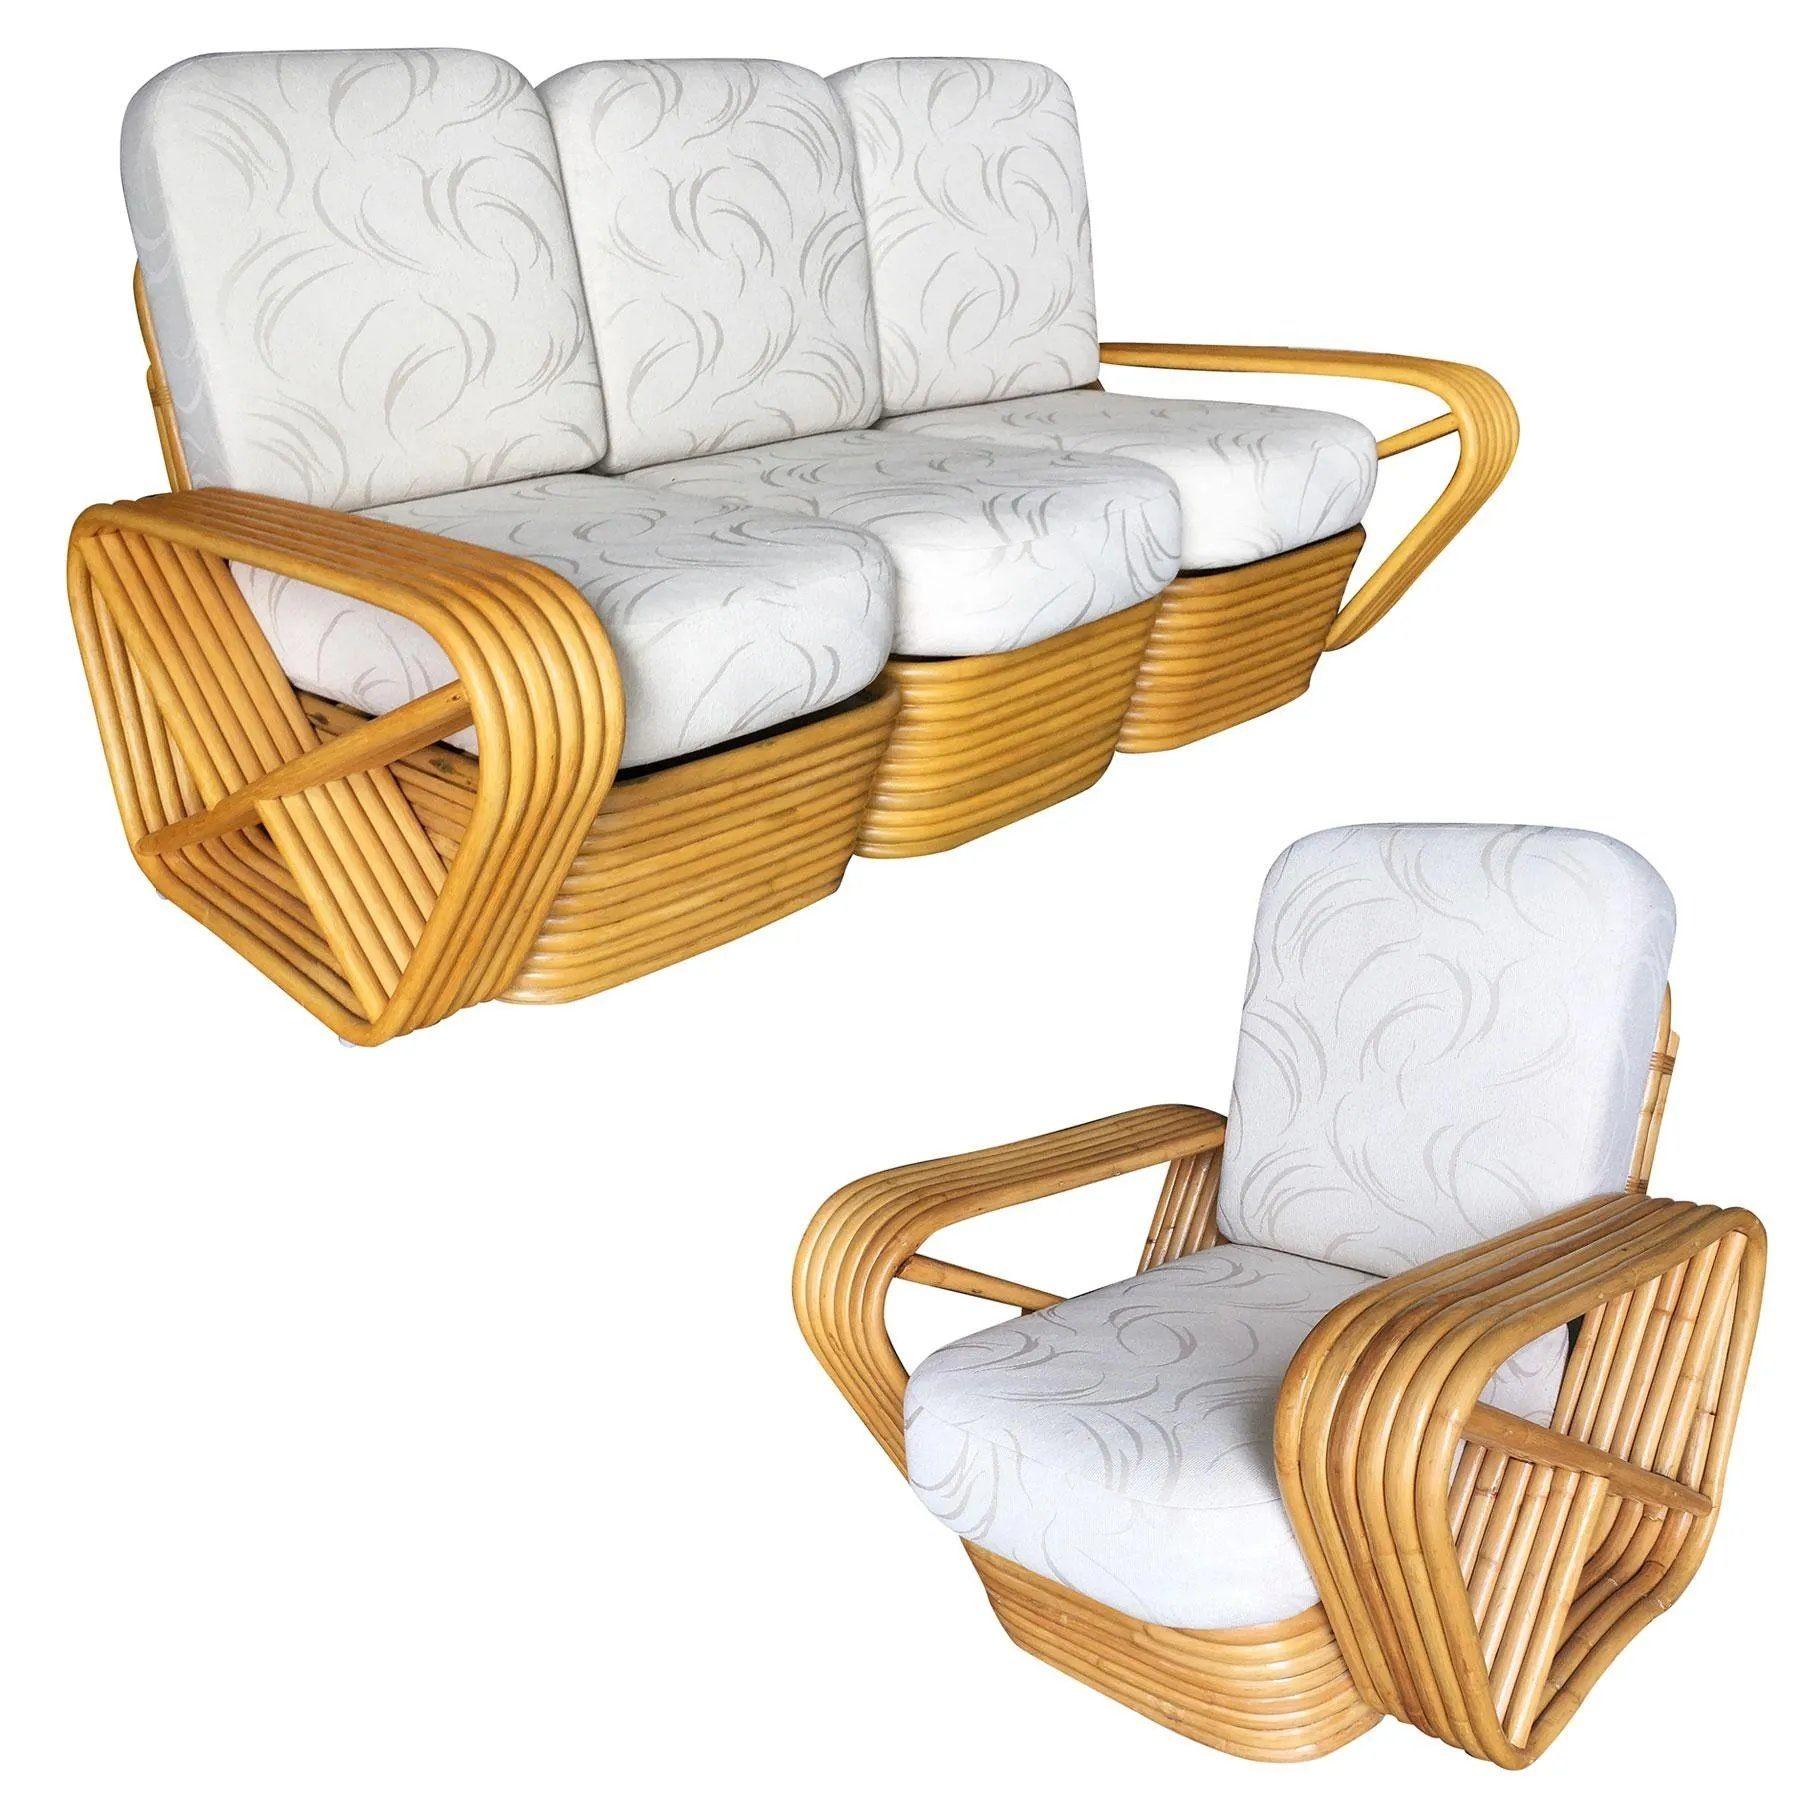 Art Deco Rattan living-room set including a matching sectional sofa and lounge chair. Both feature the famous six-strand square pretzel side arms and stacked rattan base originally designed by Paul Frankl. The seats are covered in palm leaf